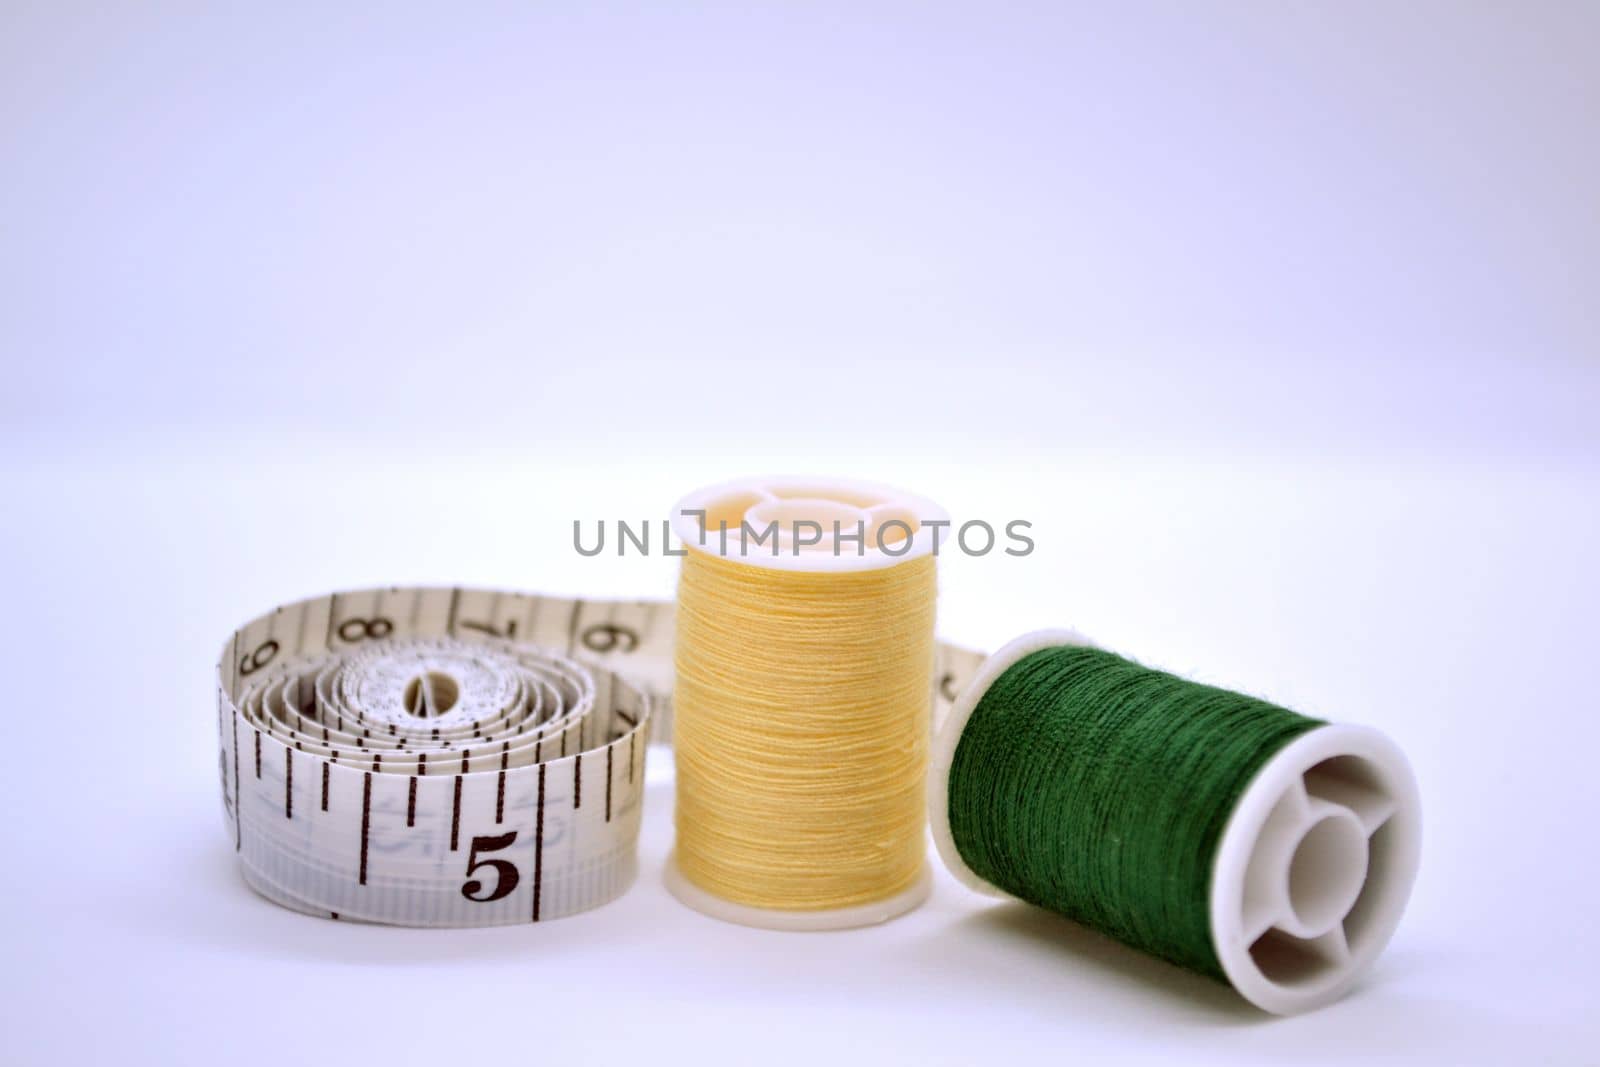 Threads and sewing ruler. In the photo, the threads are yellow and green and a sewing meter.